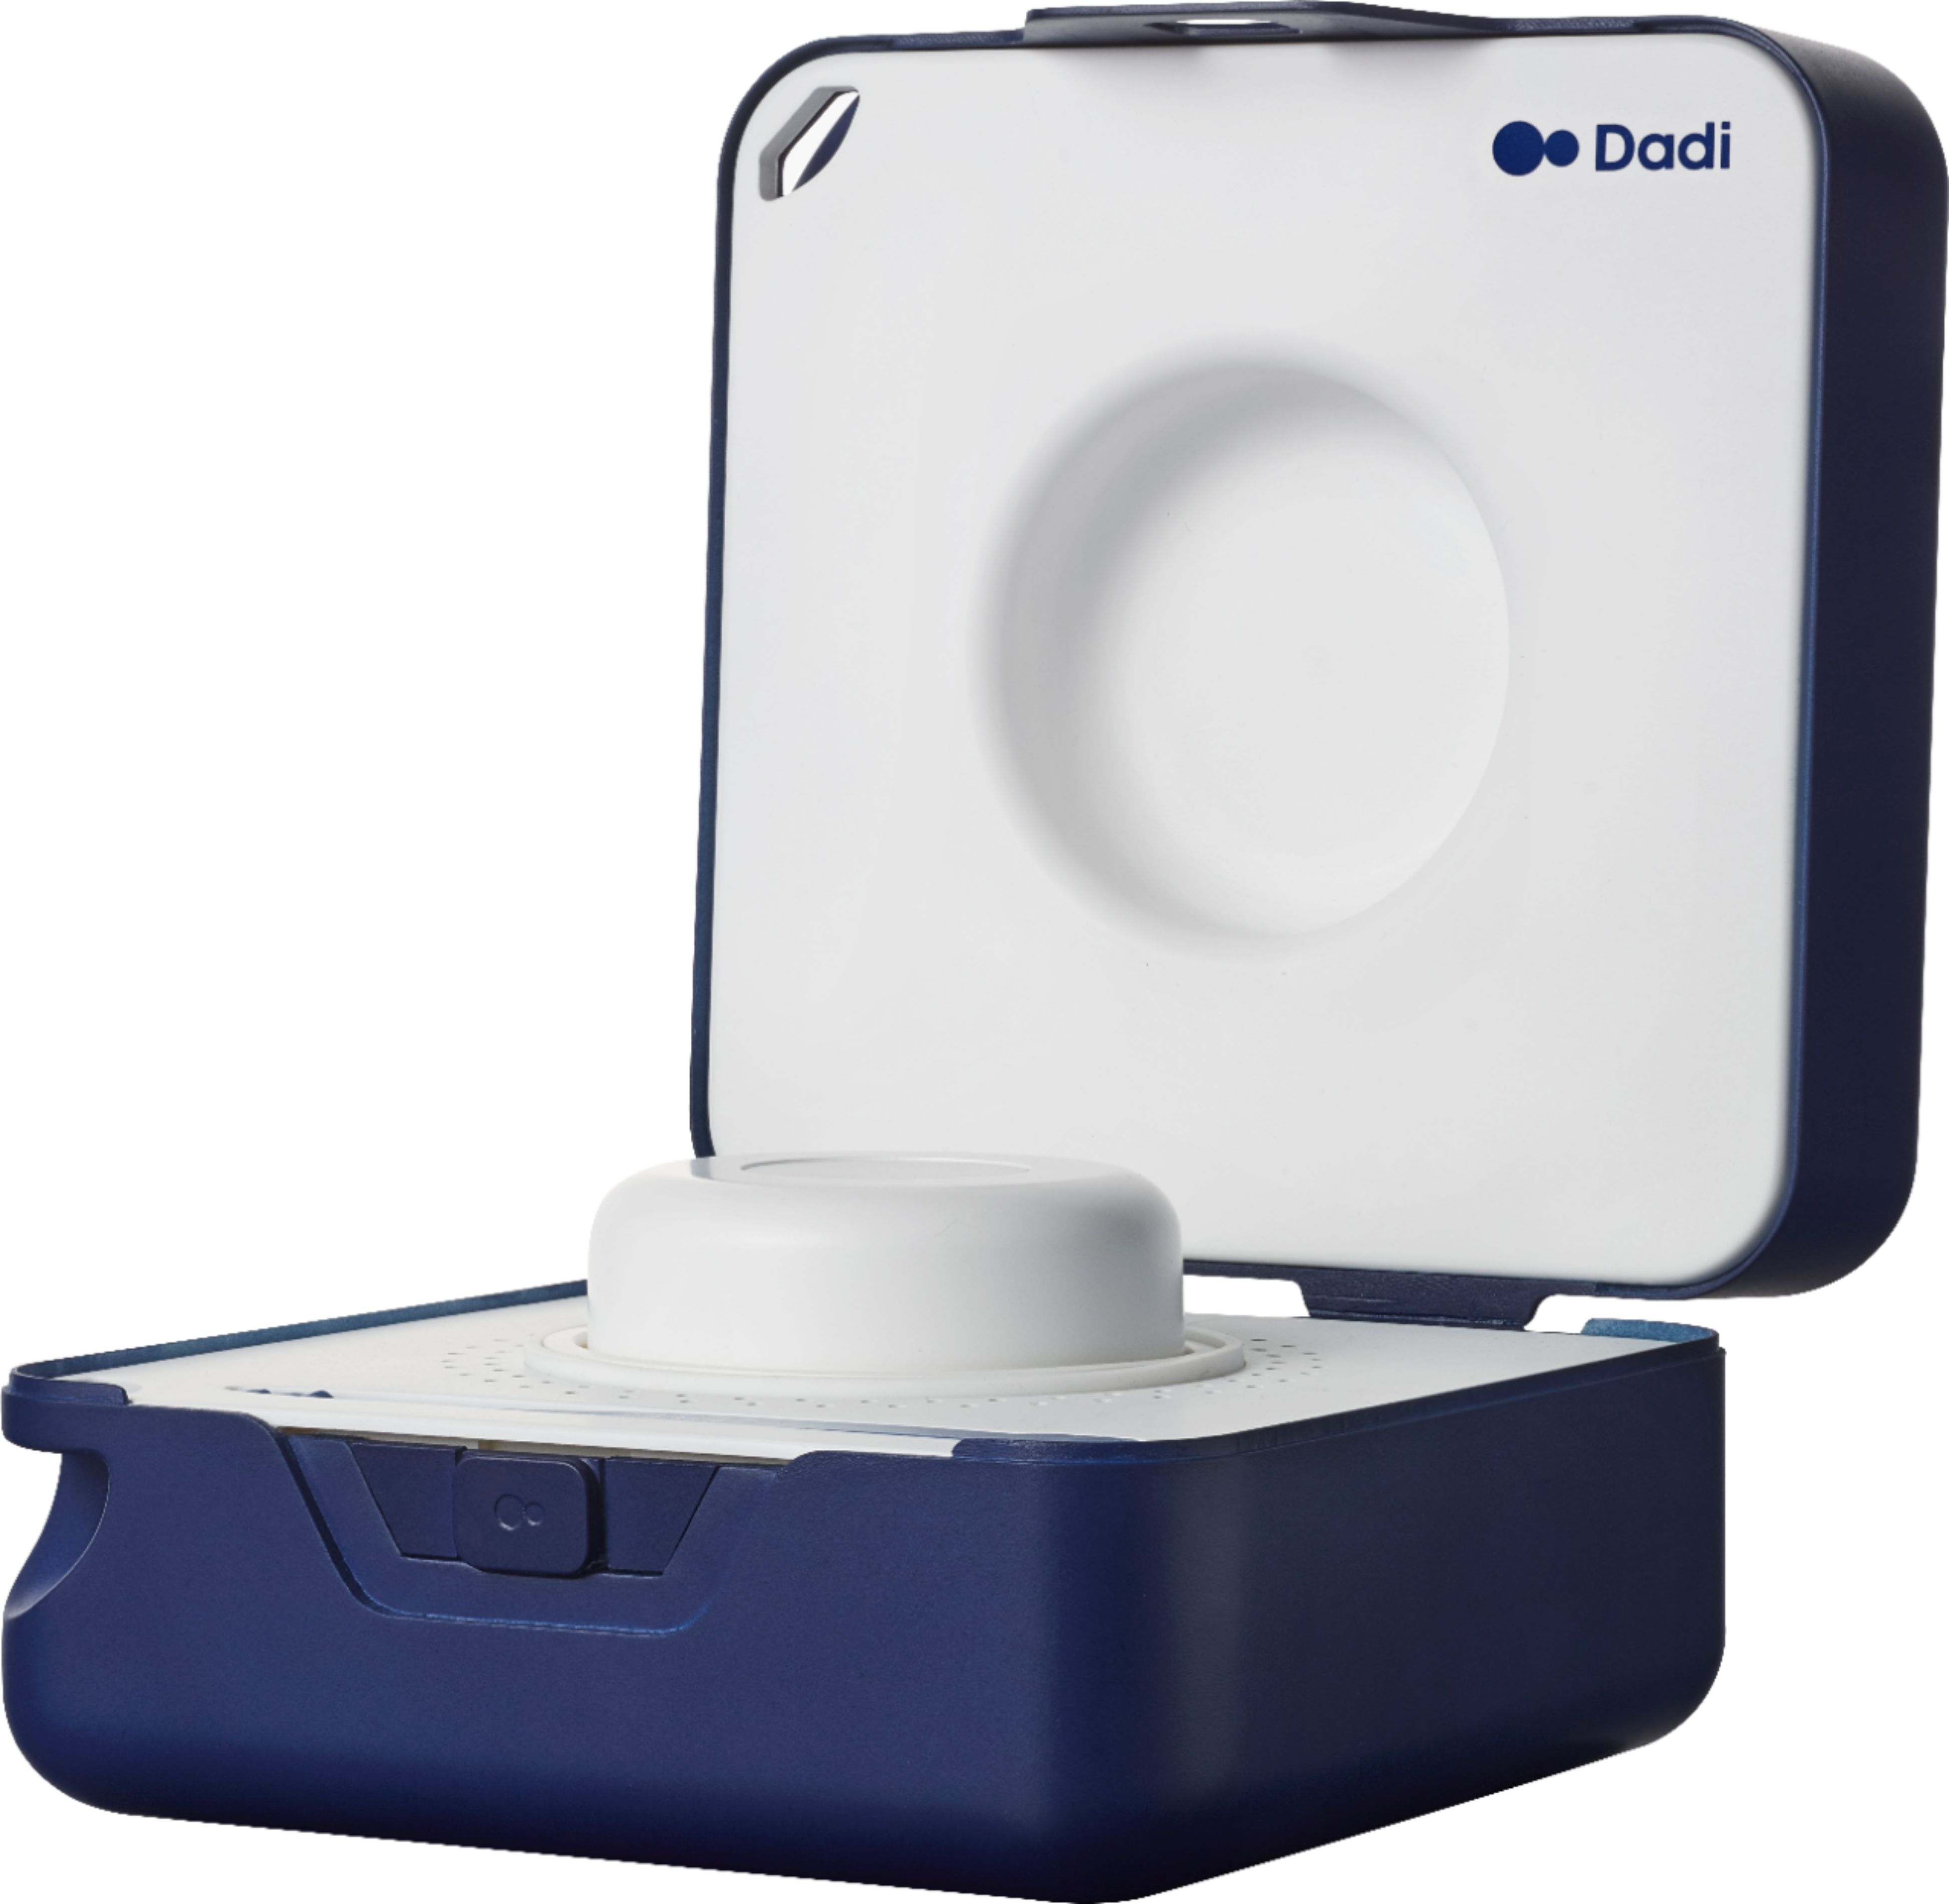 Left View: Dadi Kit Male Fertility Sperm Test & Storage | 24 Hr Test Results | Industry Leading Technology | Easy, Private, and Secure